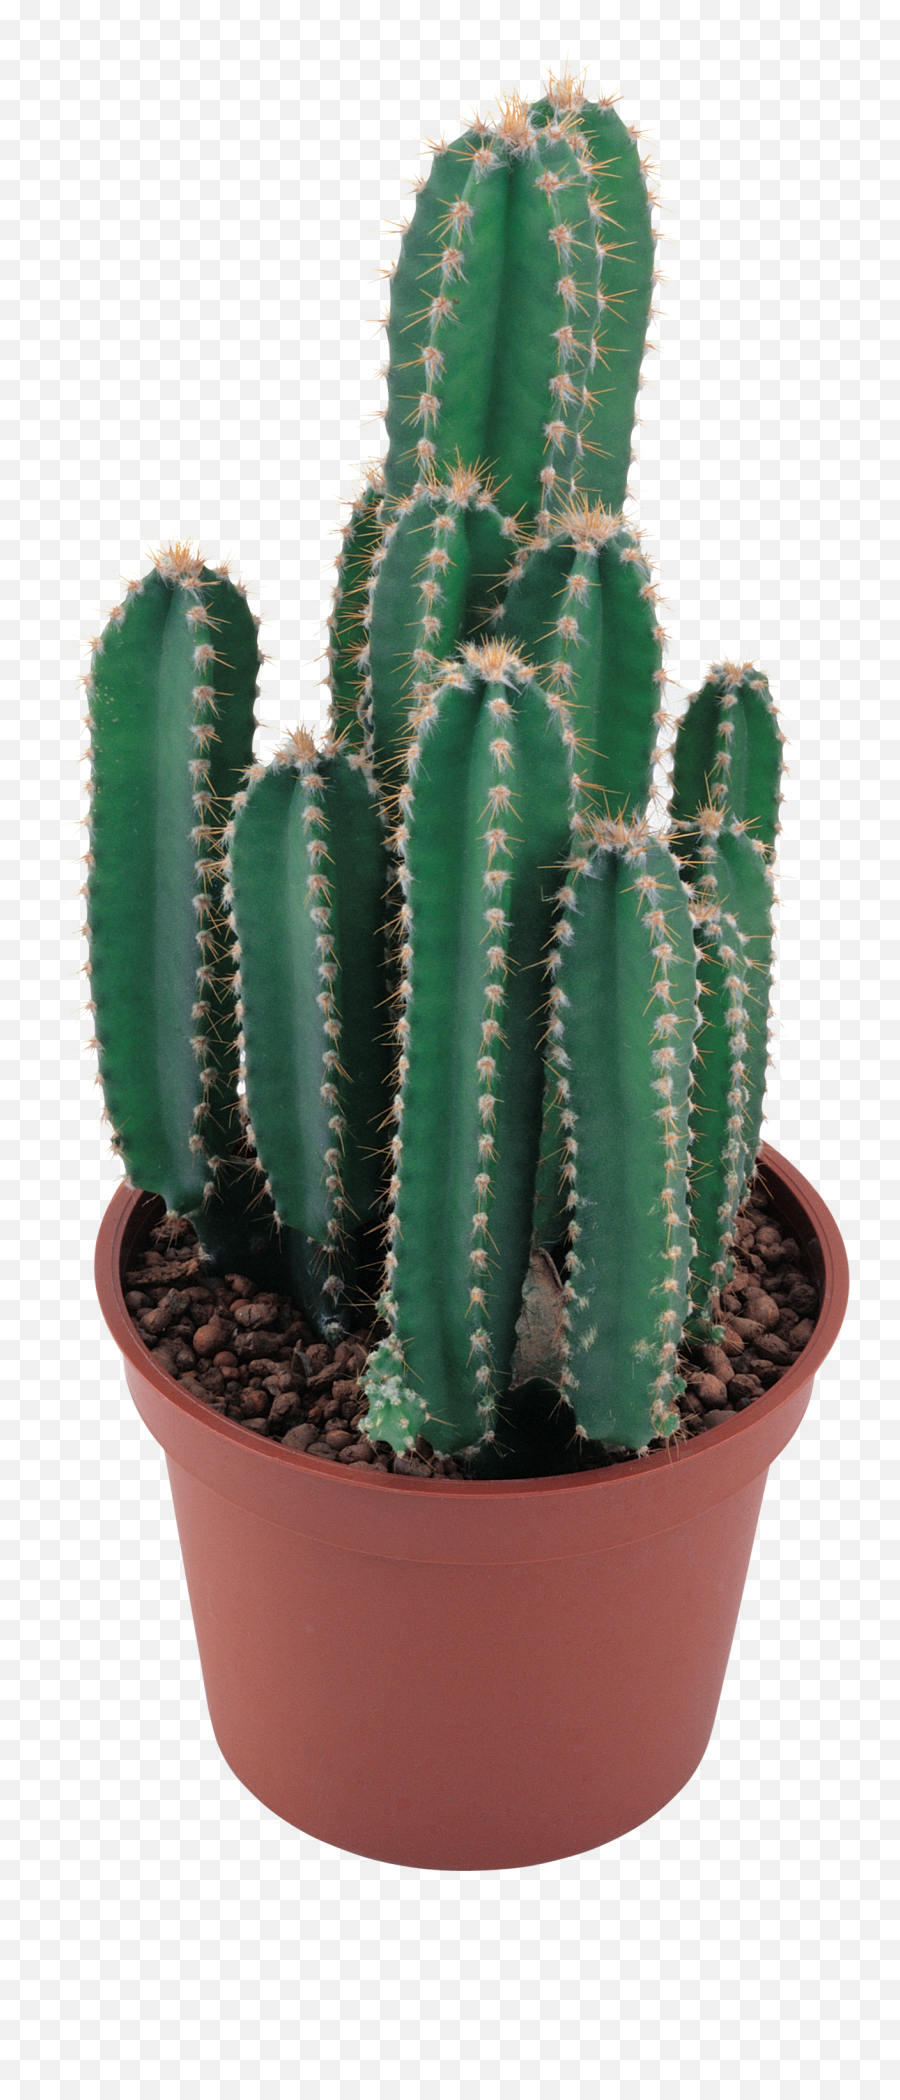 Cactus Png Image - Cactus Plant No Background,Cacti Png